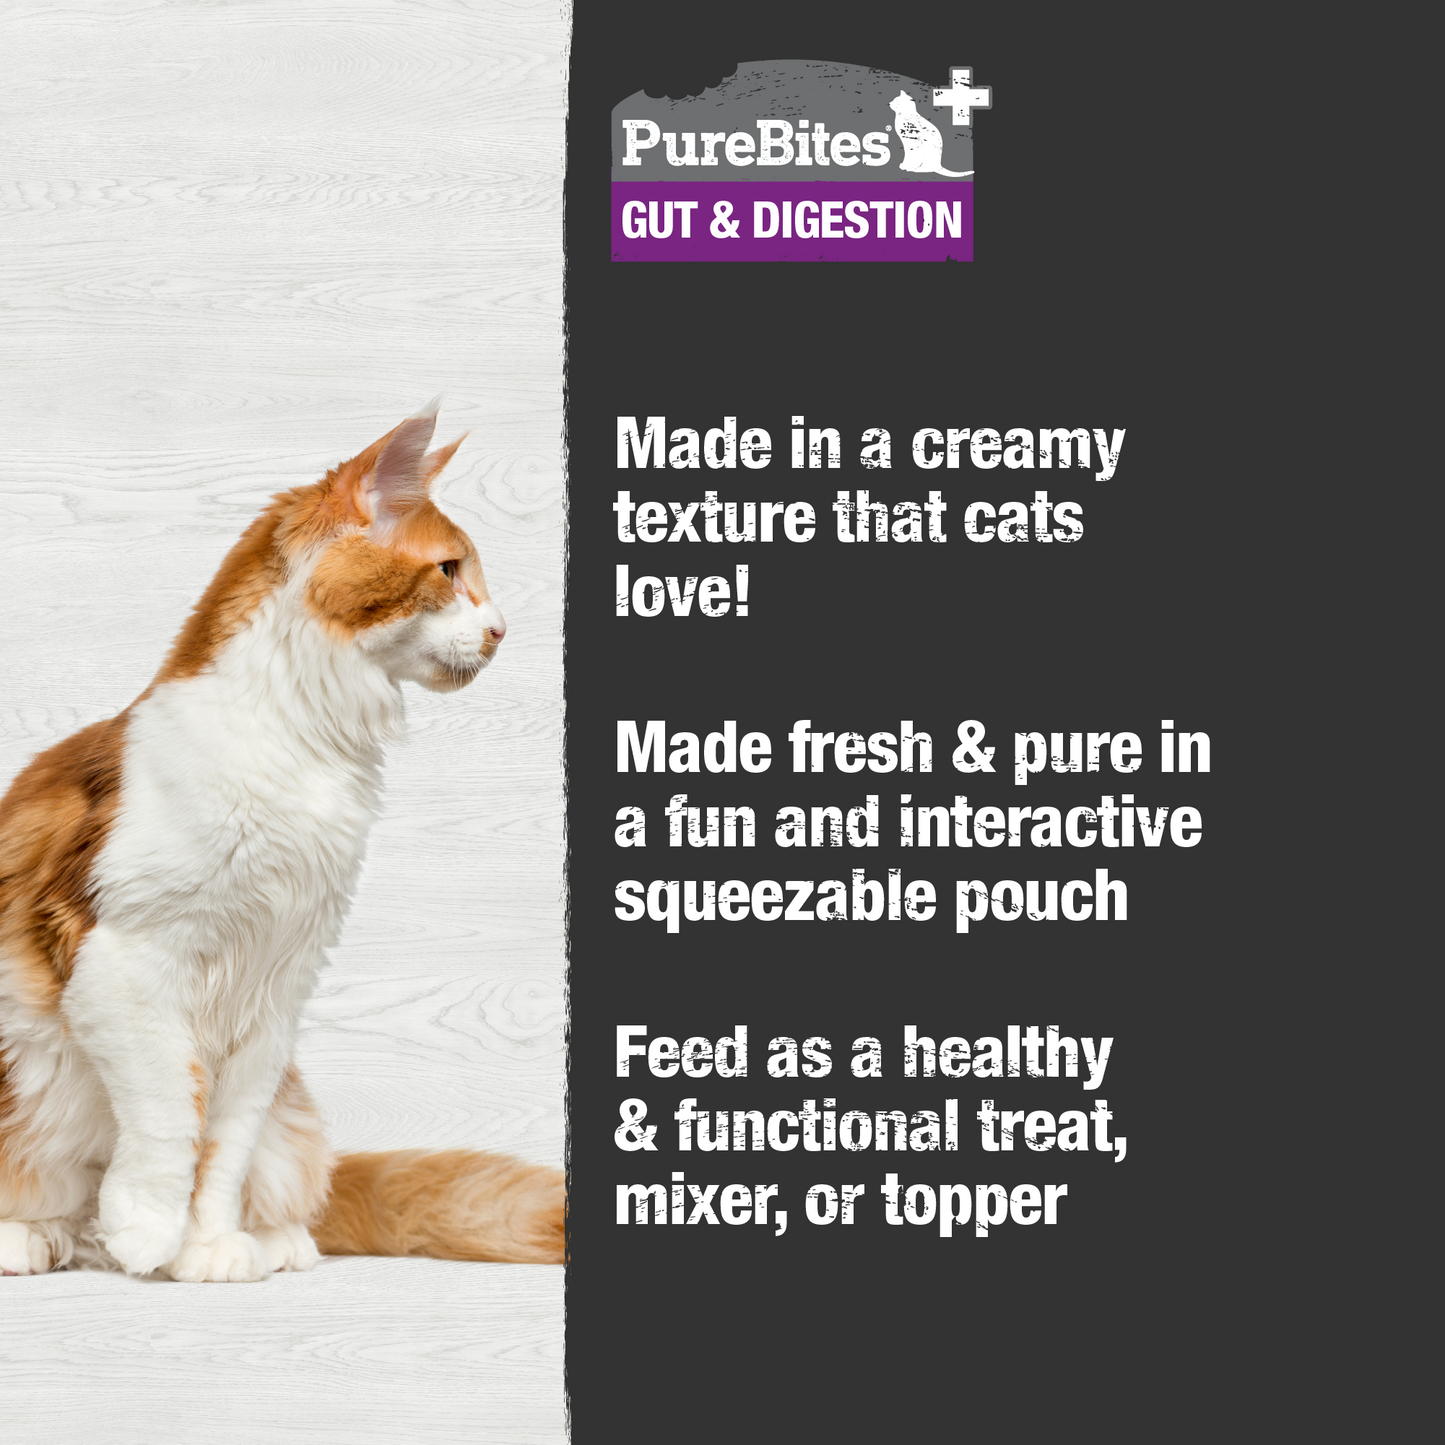 Made fresh & pure in a creamy texture and in a fun and interactive squeezable pouch, locking in the taste cats crave and superior nutrition that pet parents love